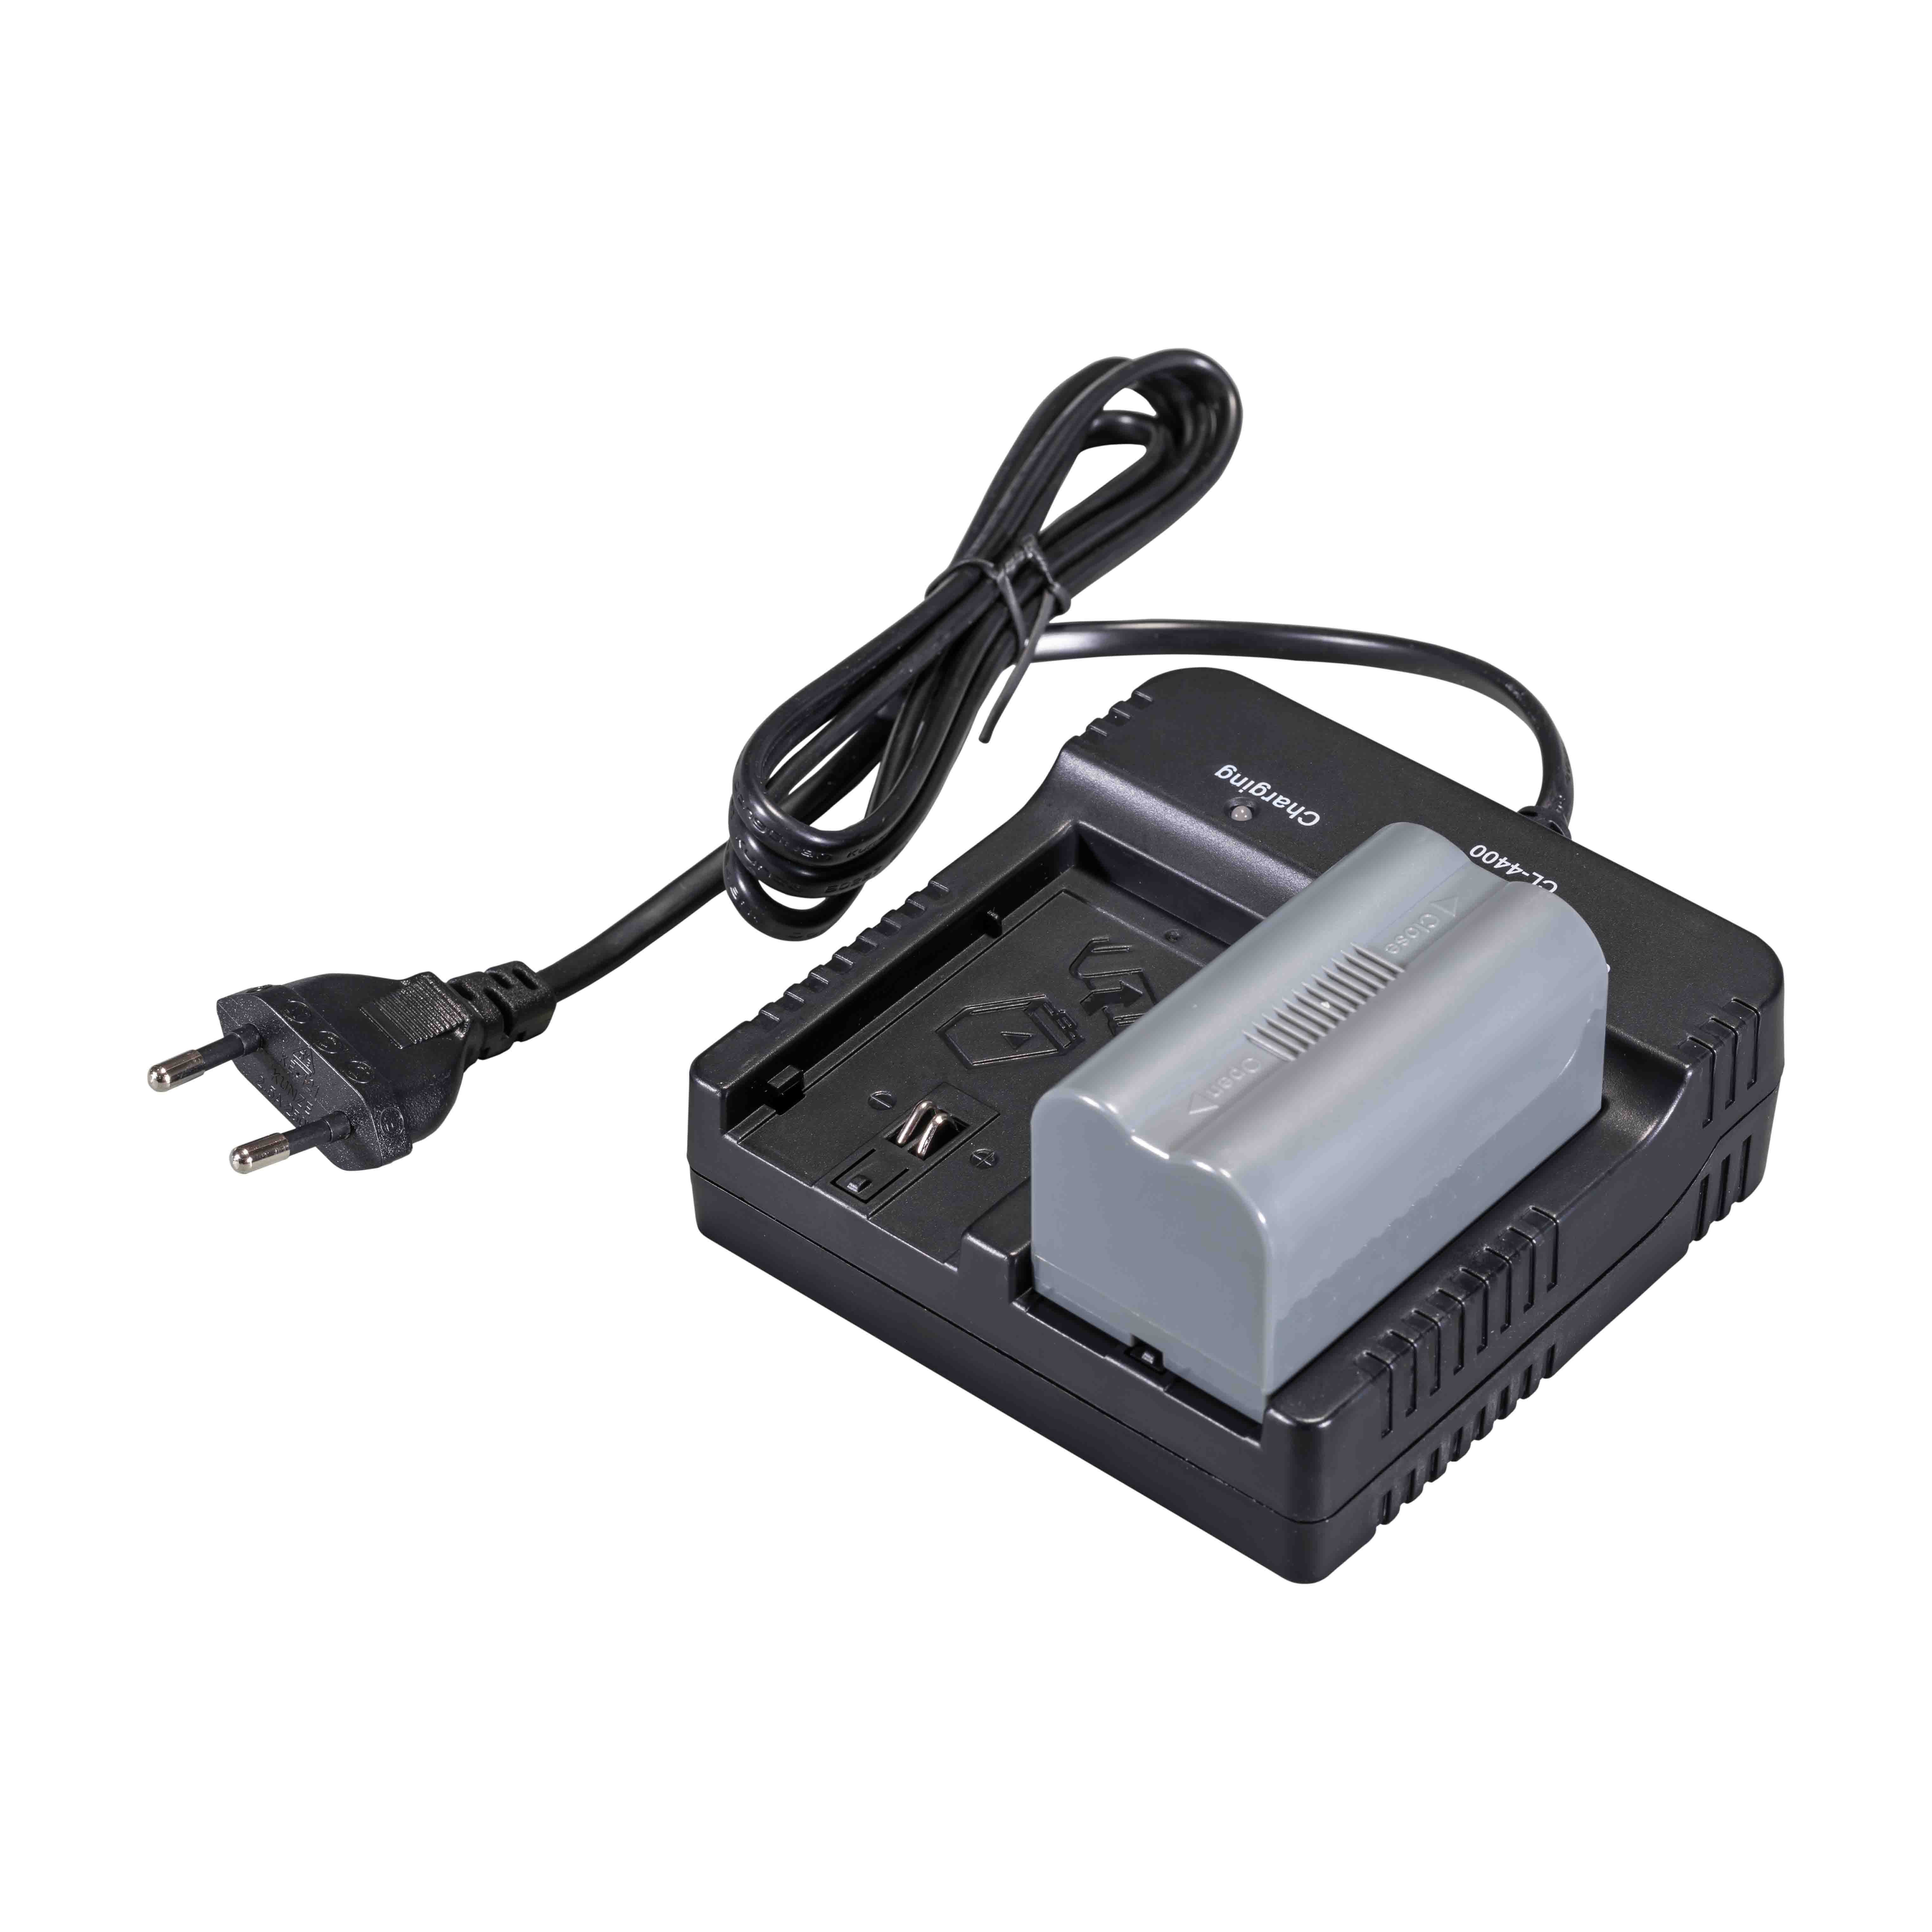 Battery/Charger BL-5000+CL-4400